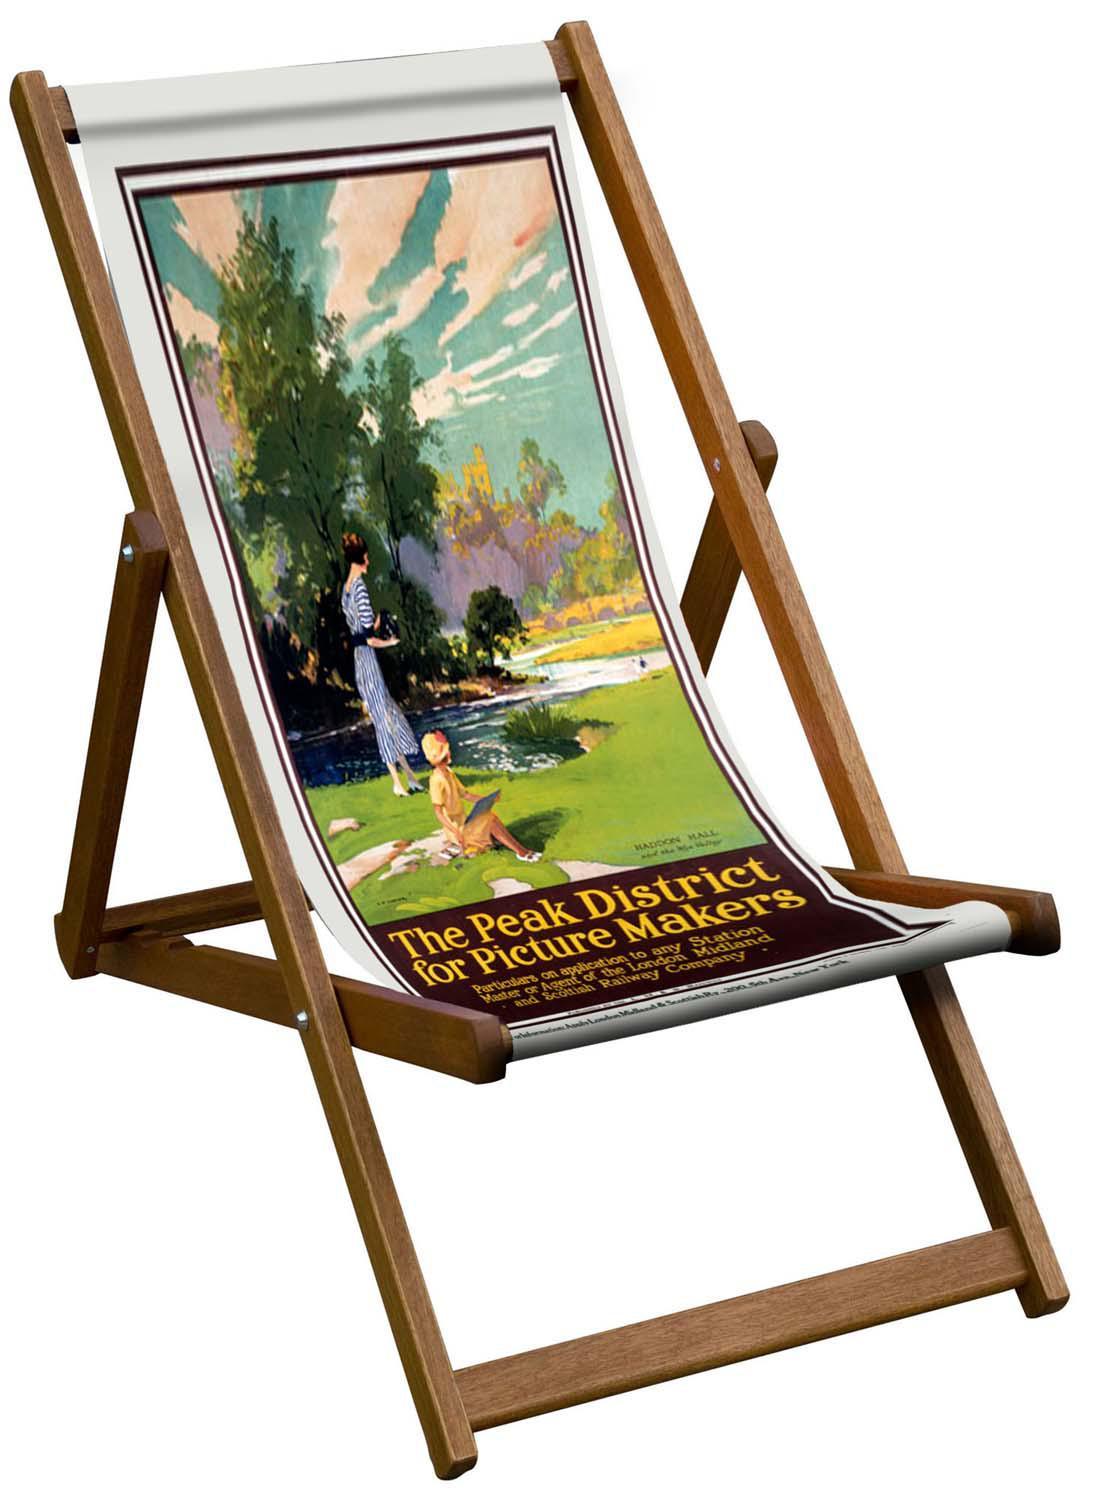 The Peak District For Picture Makers - National Railway Museum Deckchair